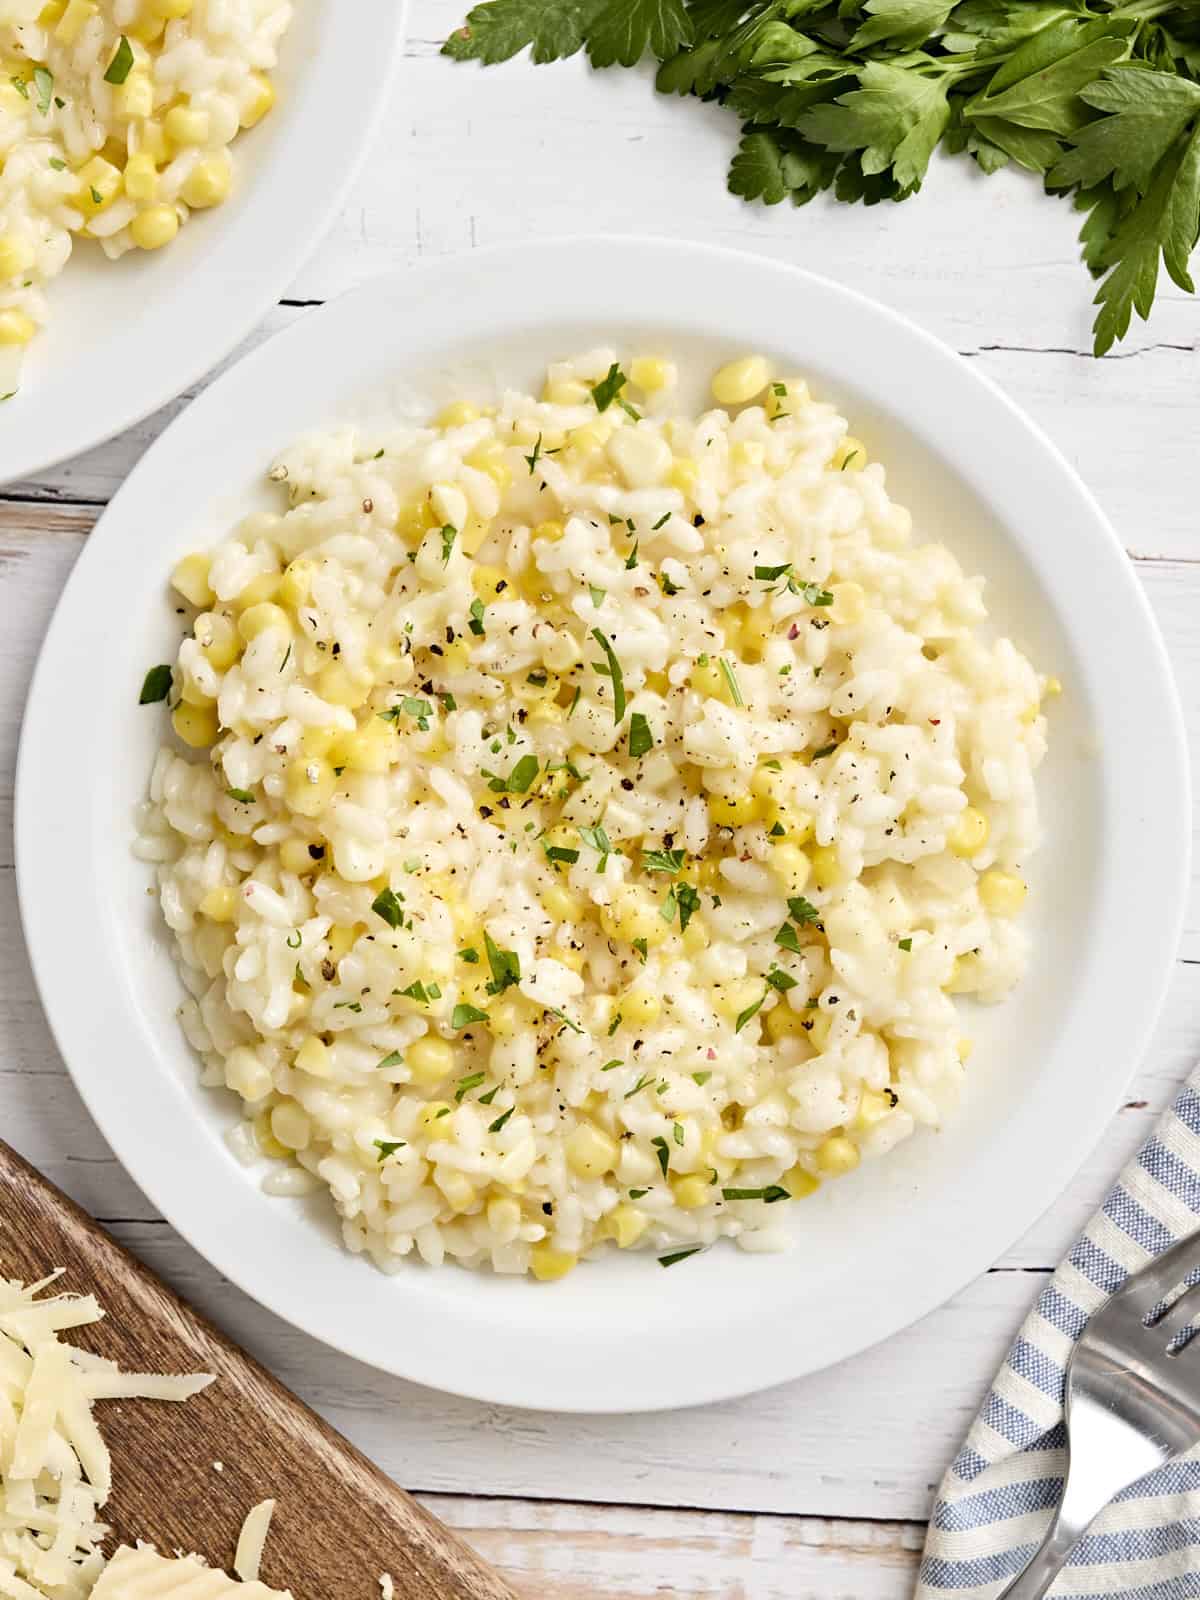 A plate of sweet corn risotto.